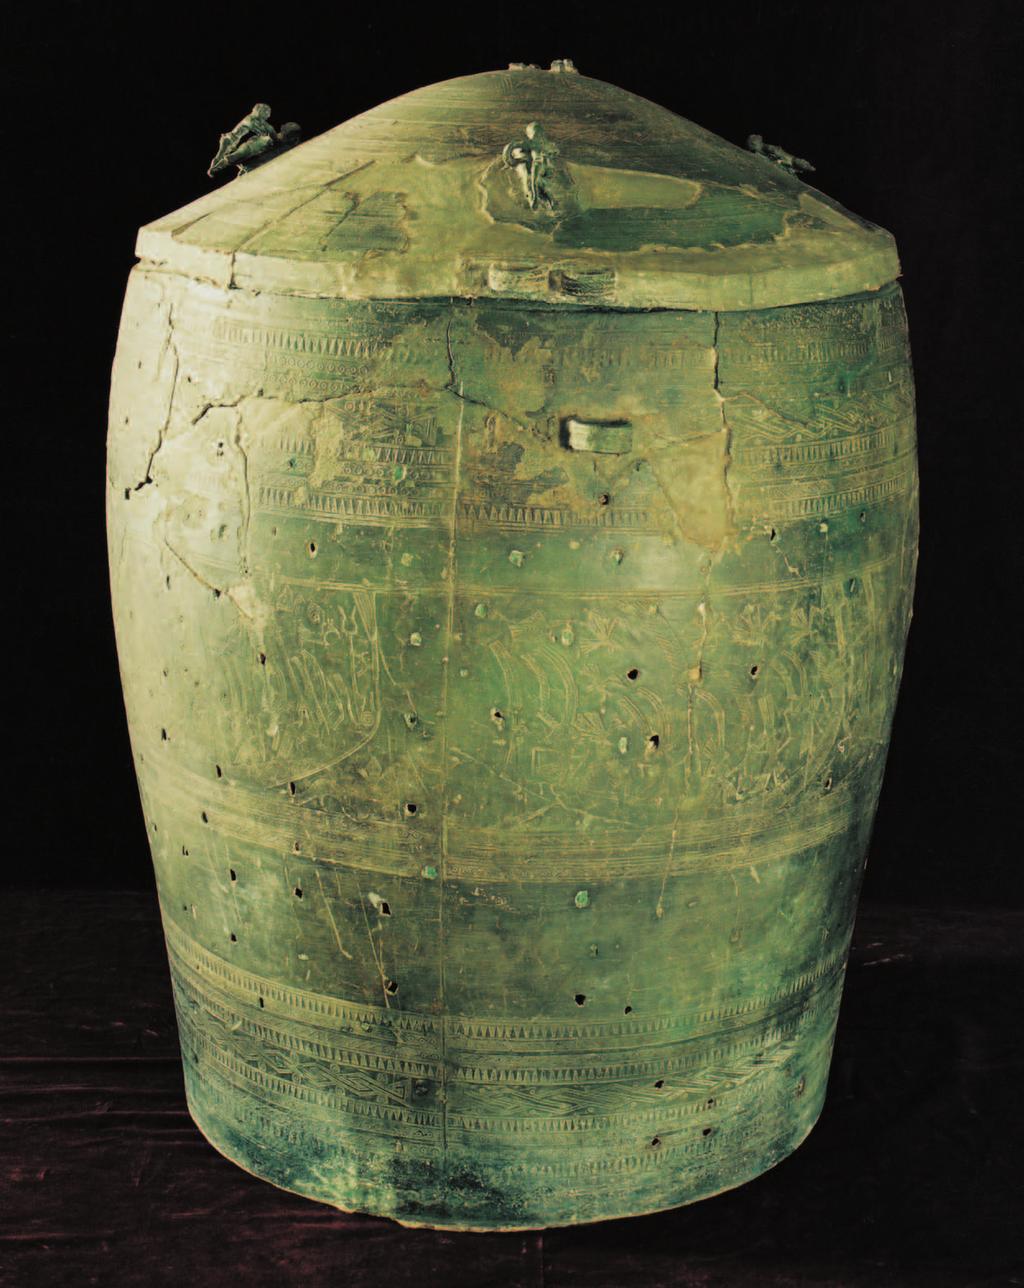 30 Very large Dong Son bronze storage jar found in the northern Vietnam village of Dao Thinh, four pairs of mating couples on the lid, central